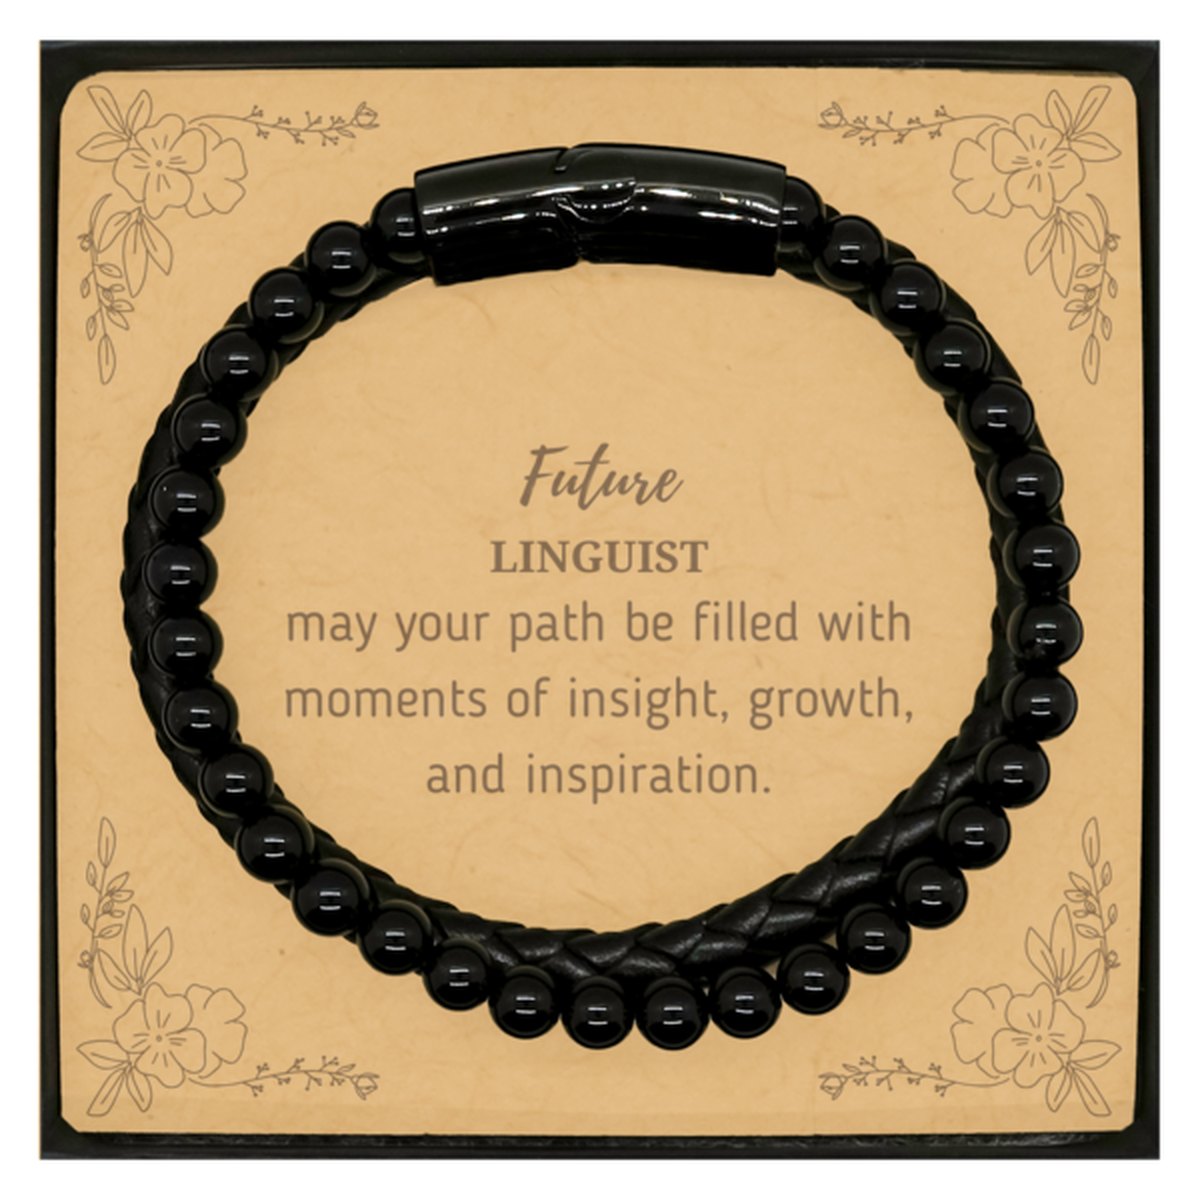 Future Linguist Gifts, May your path be filled with moments of insight, Graduation Gifts for New Linguist, Christmas Unique Stone Leather Bracelets For Men, Women, Friends